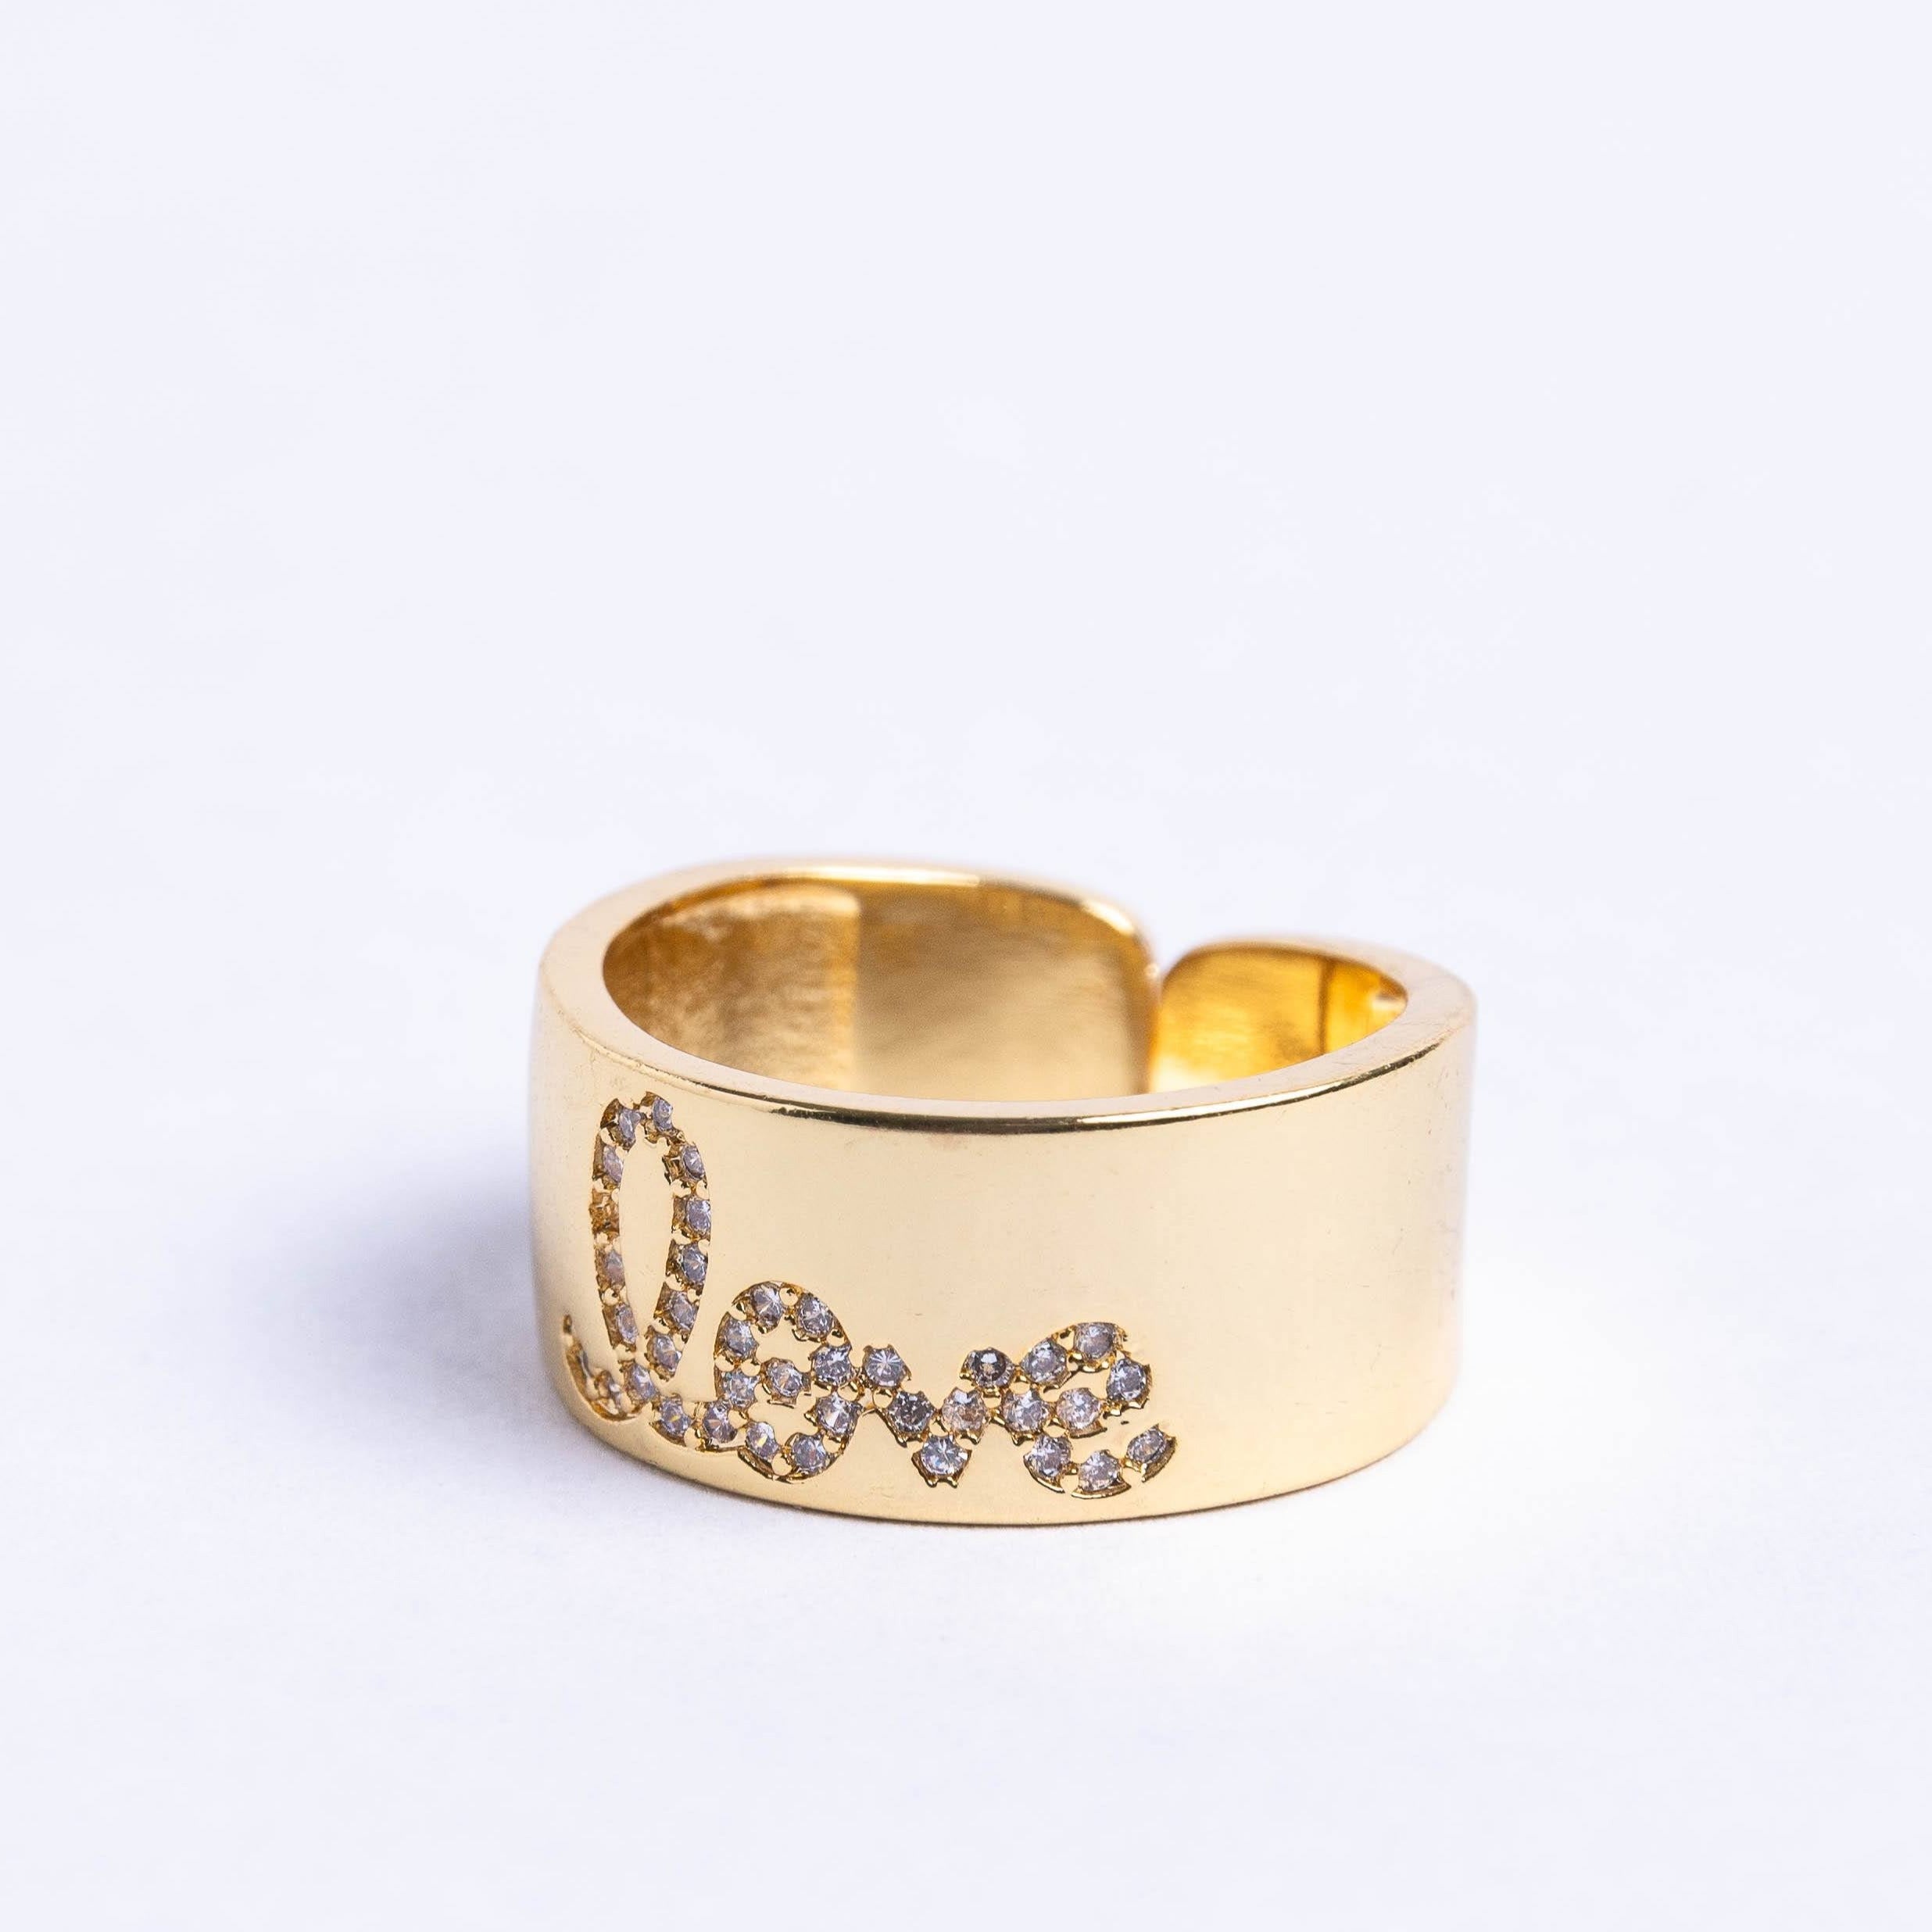 Love Ring | Shop the perfect gift with this bestselling romantic ring